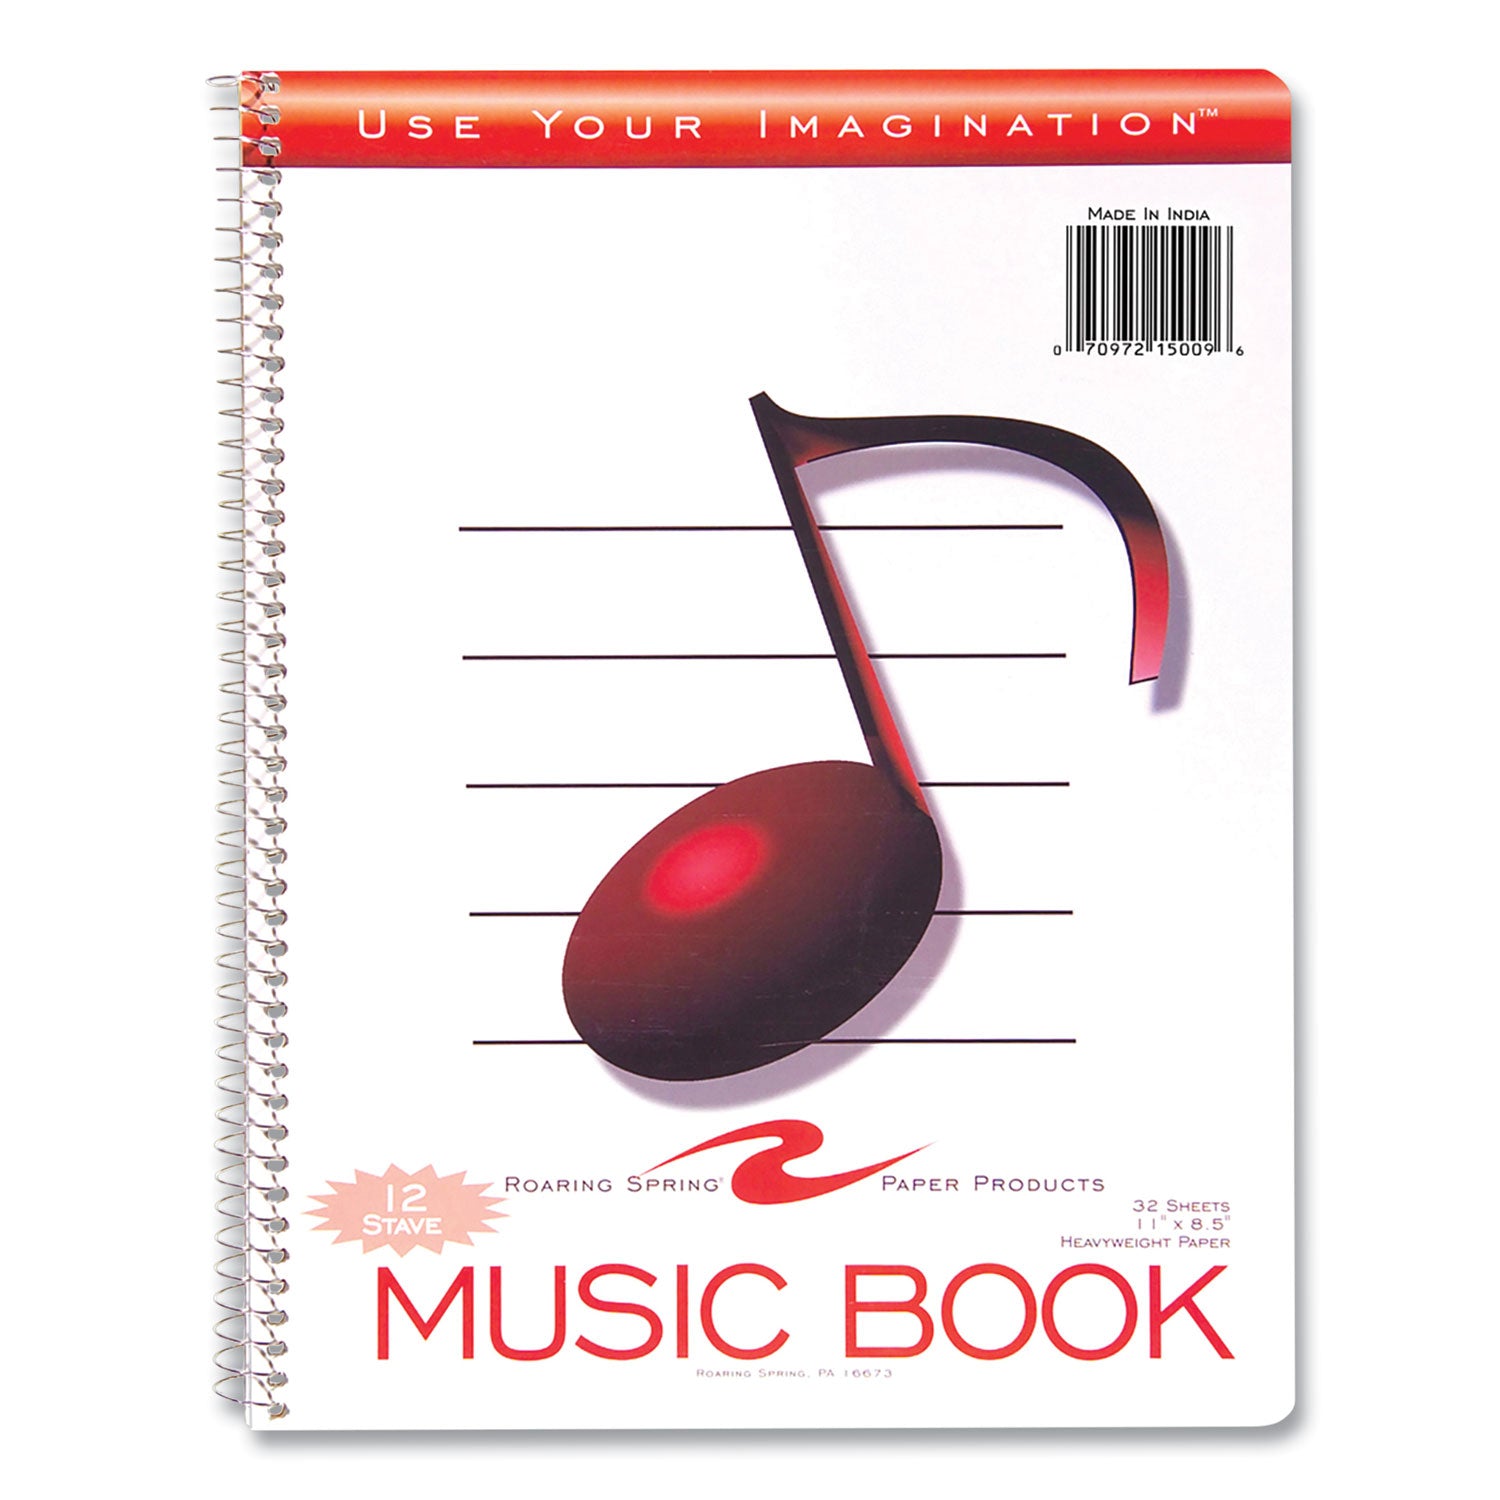 music-notebook-music-transcription-format-white-cover-32-11-x-85-sheets-24-carton-ships-in-4-6-business-days_roa15009cs - 2